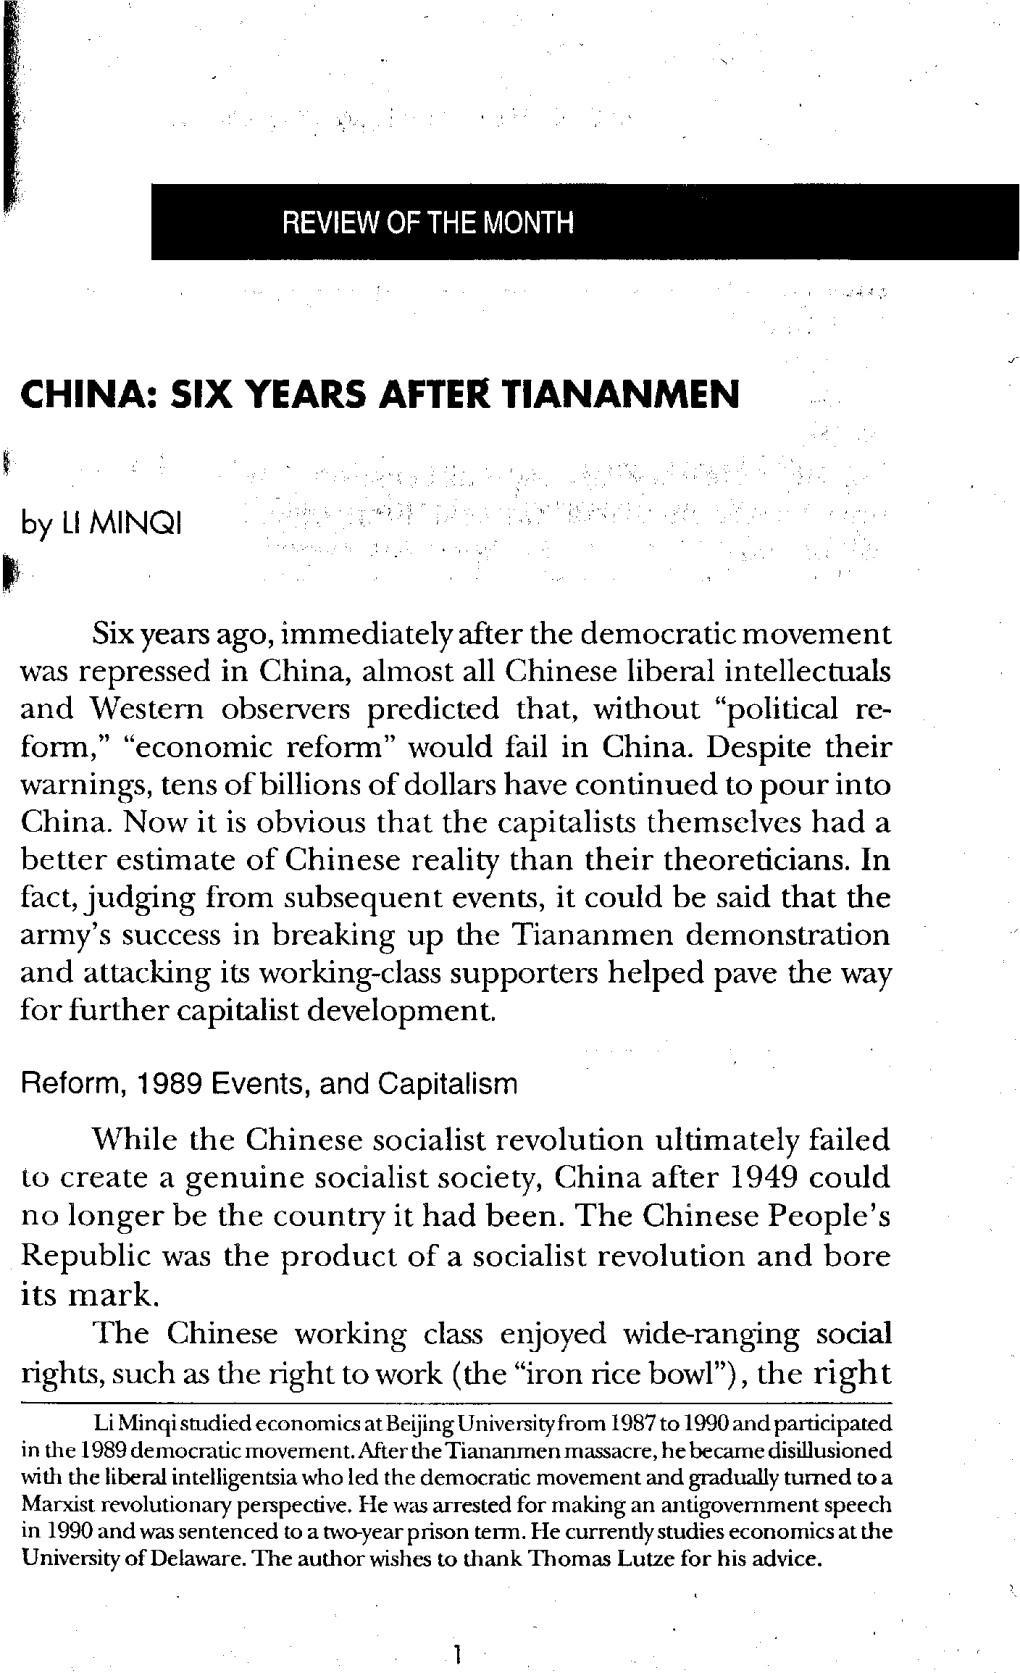 China: Six Years After Tiananmen